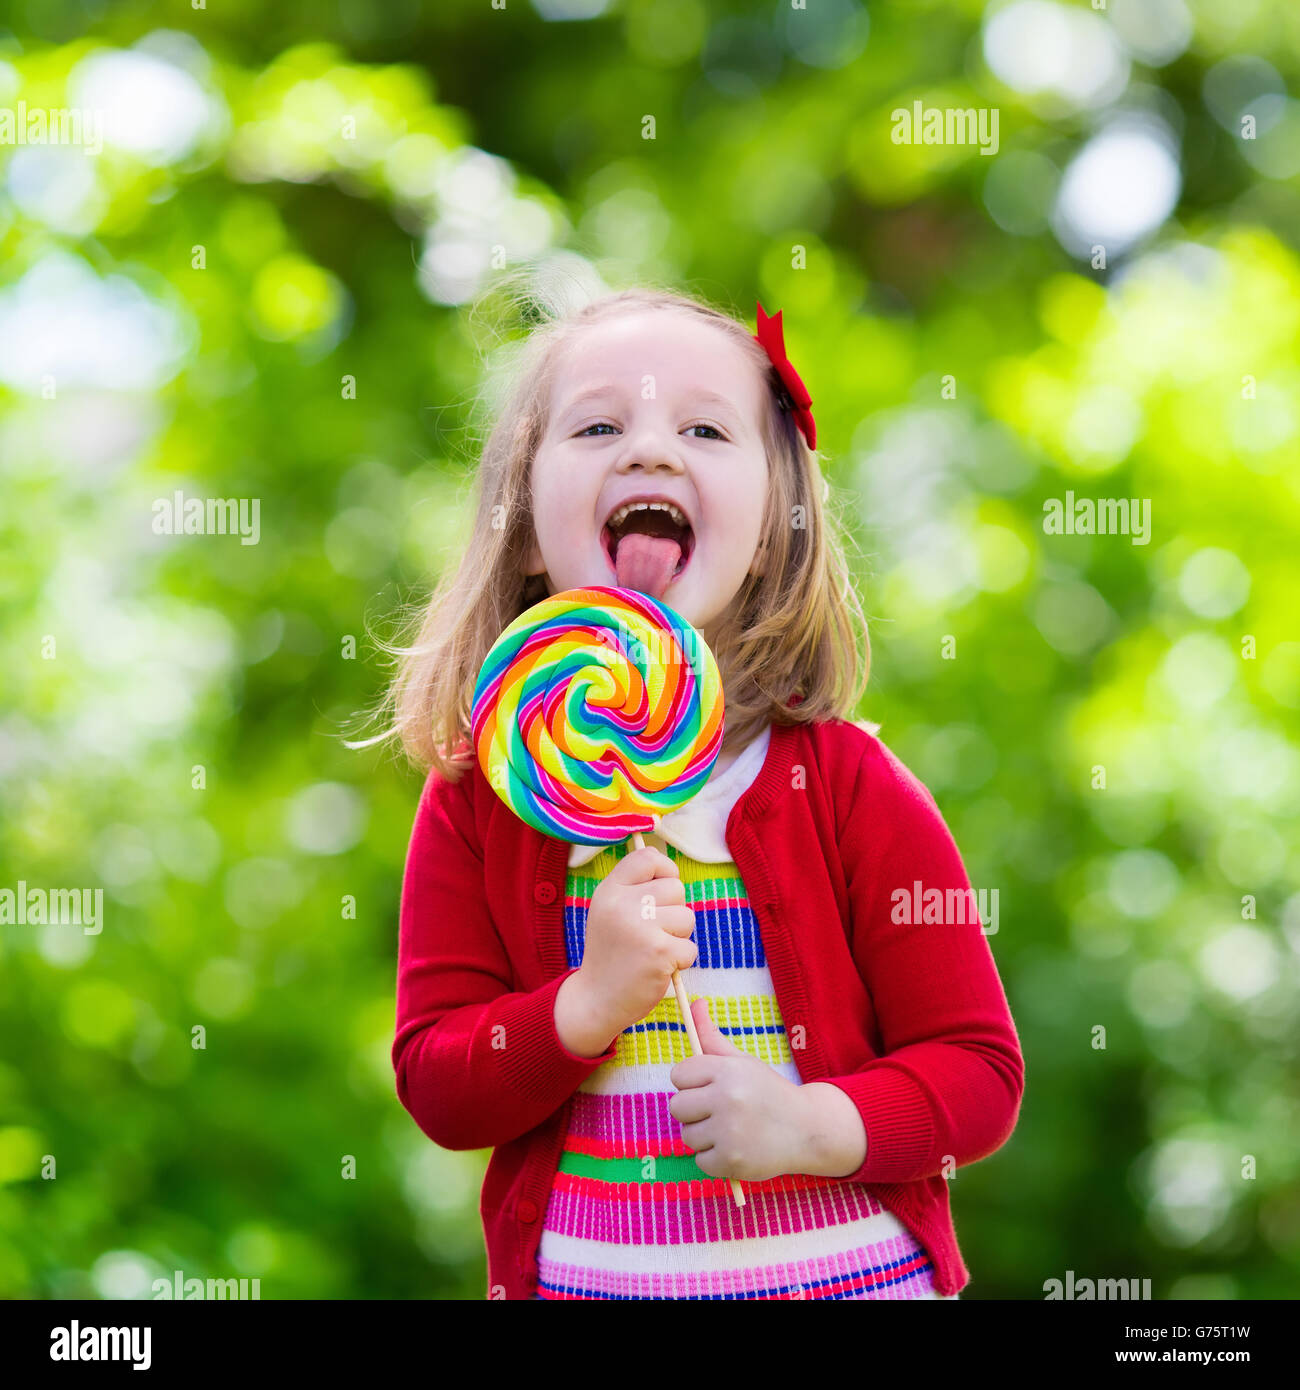 Cute little girl with big colorful lollipop. Child eating sweet candy bar. Sweets for young kids. Summer outdoor fun. Stock Photo